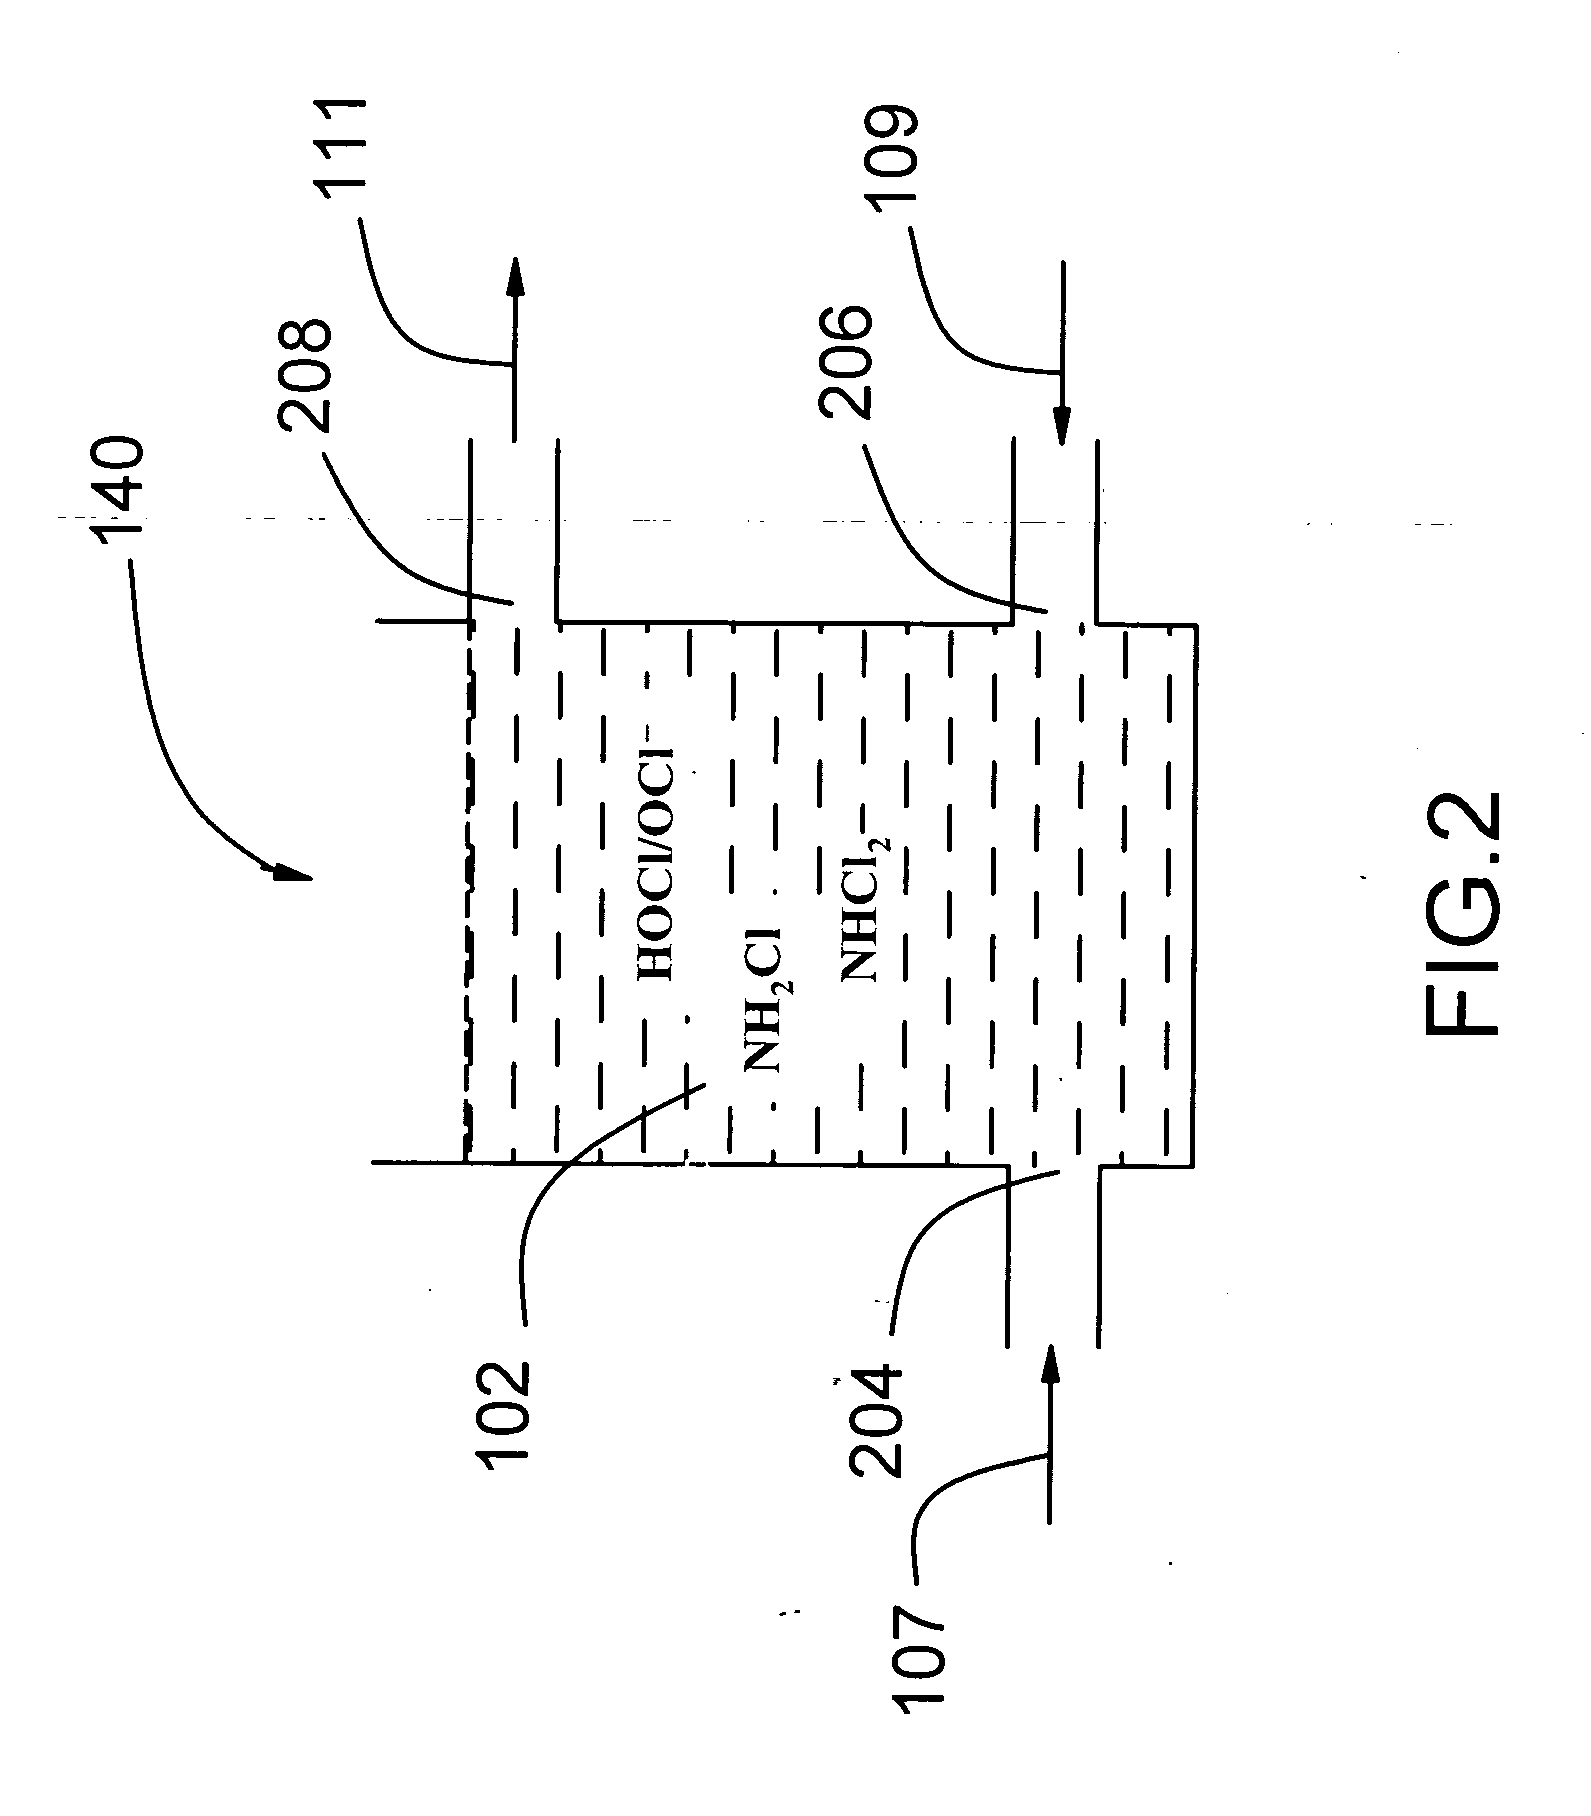 Water disinfection system using simultaneous multiple disinfectants